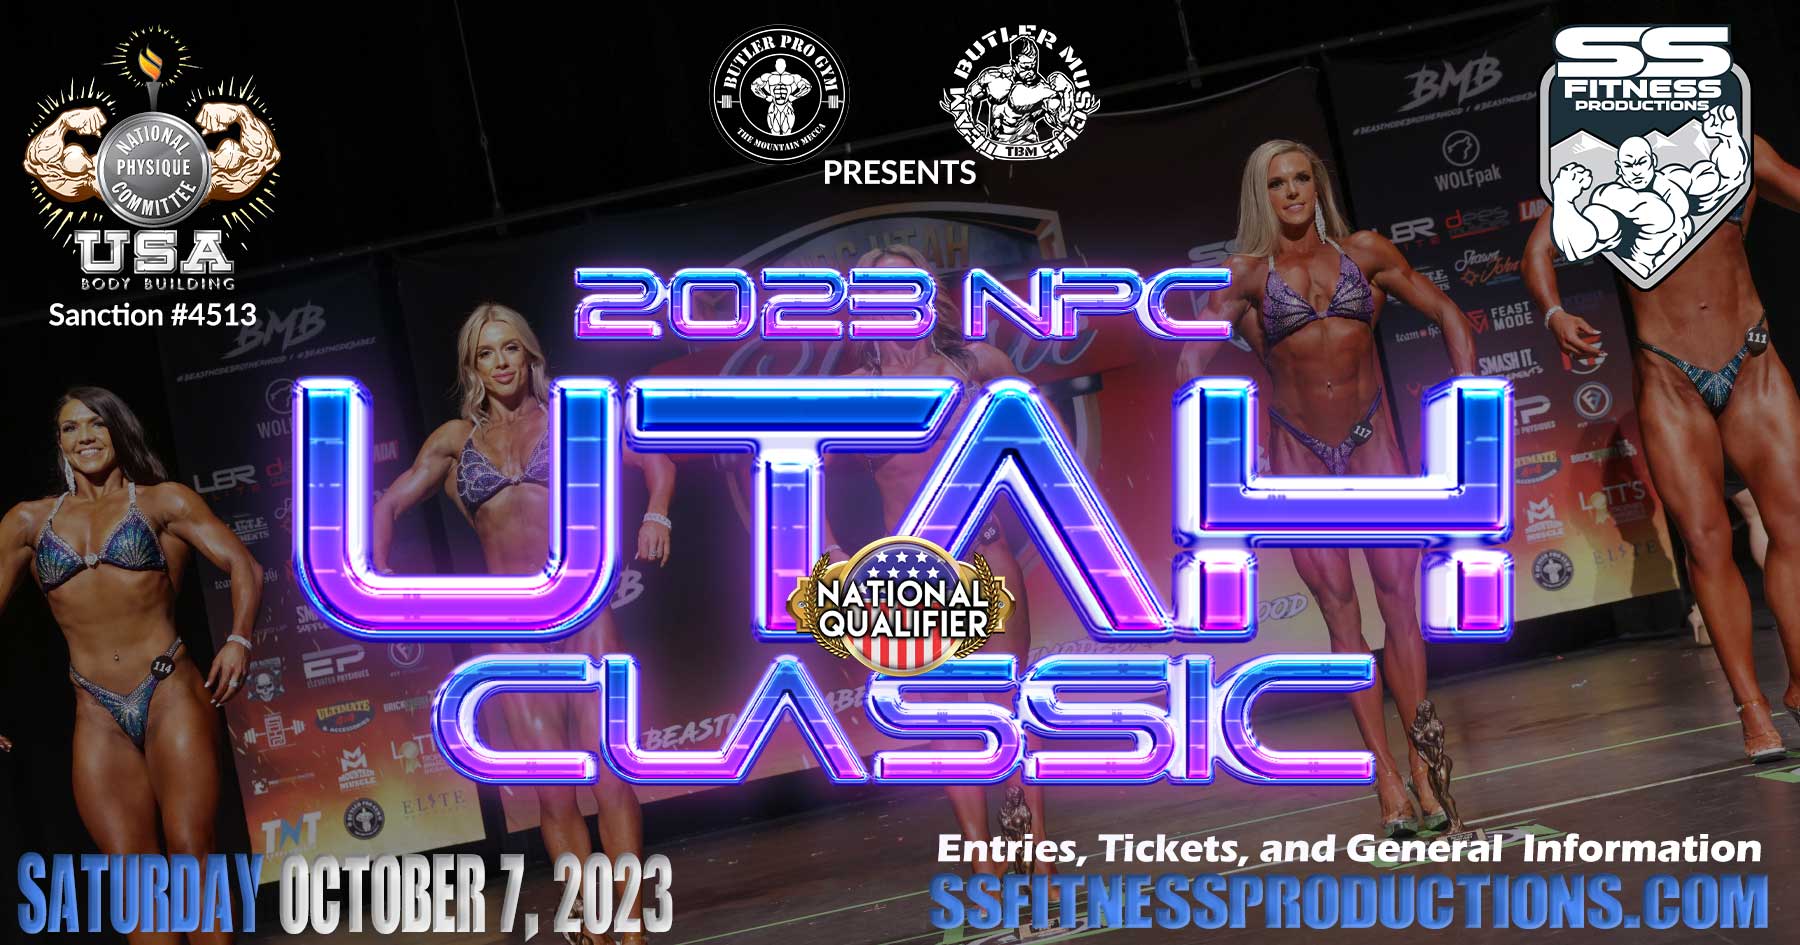 NPC Bodybuilding, Physique, Bikini, Figure, Wellness and Fitness Championships In Utah - SS Fitness Productions hq picture